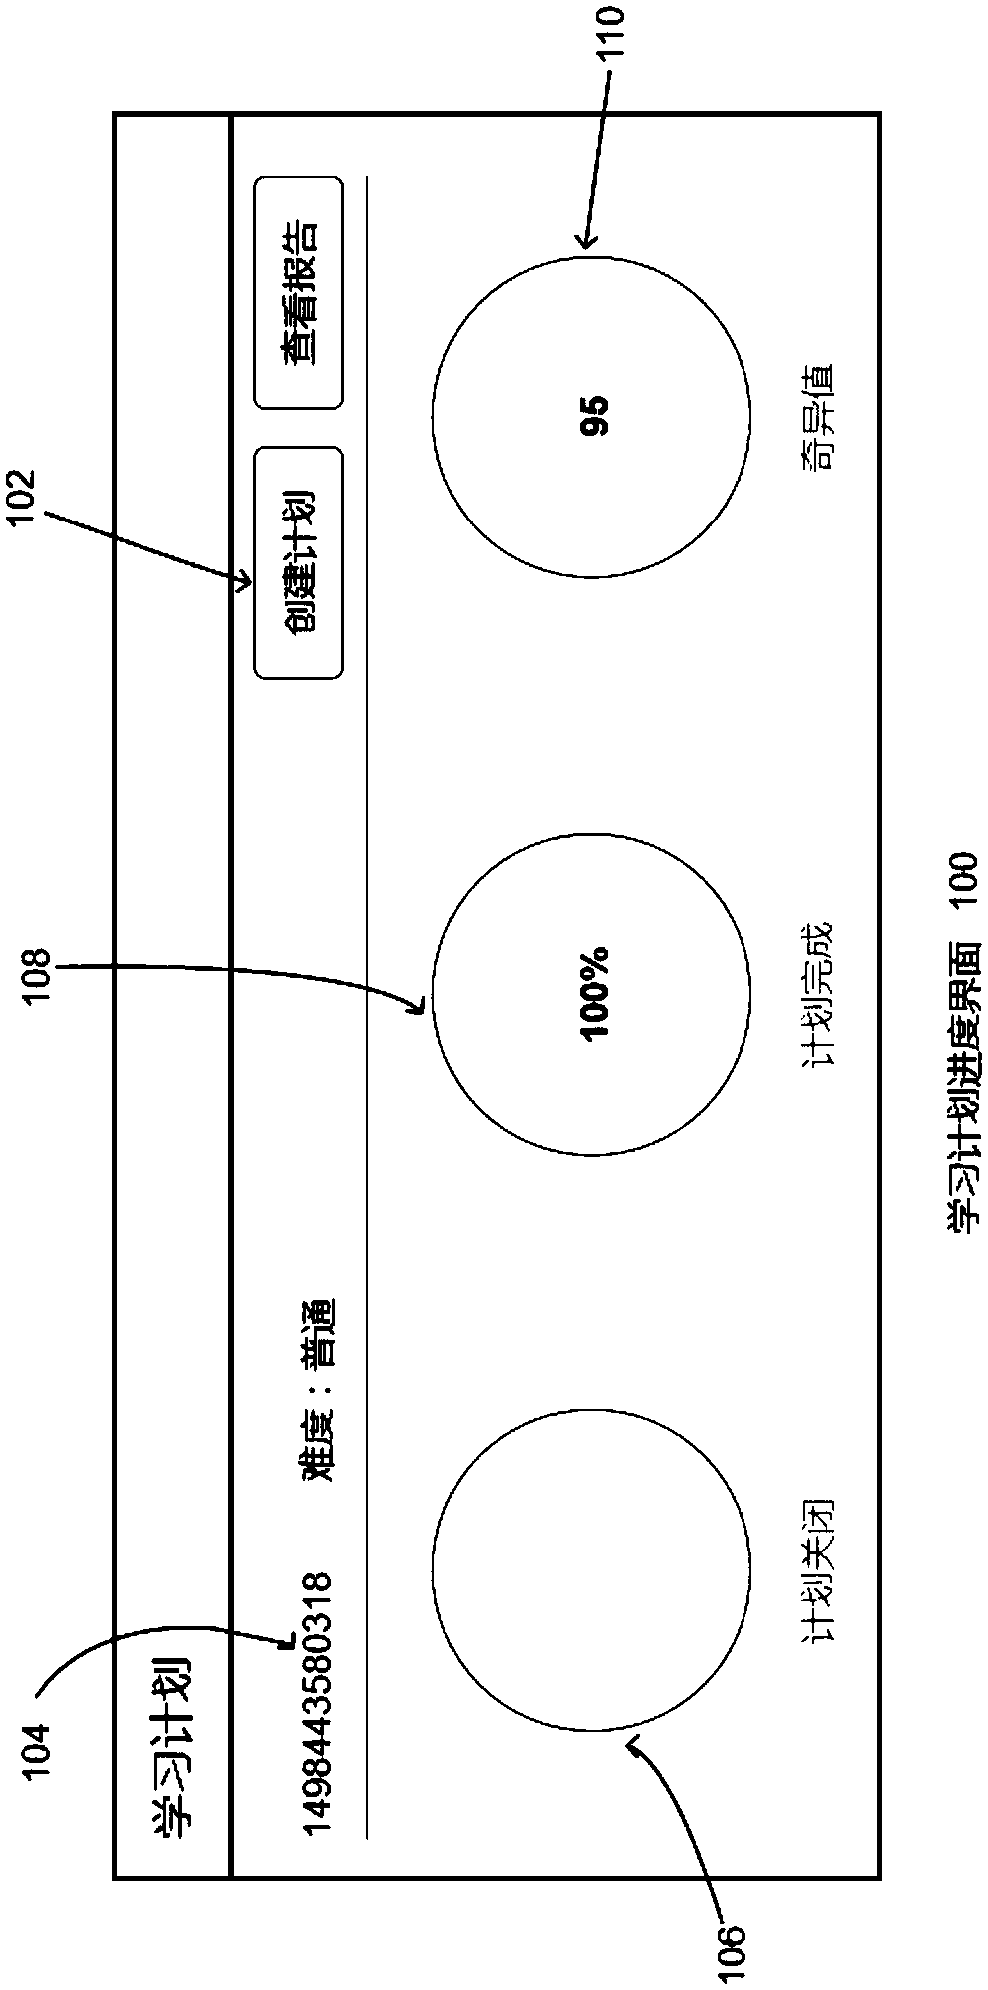 An adaptive learning recommendation method and apparatus